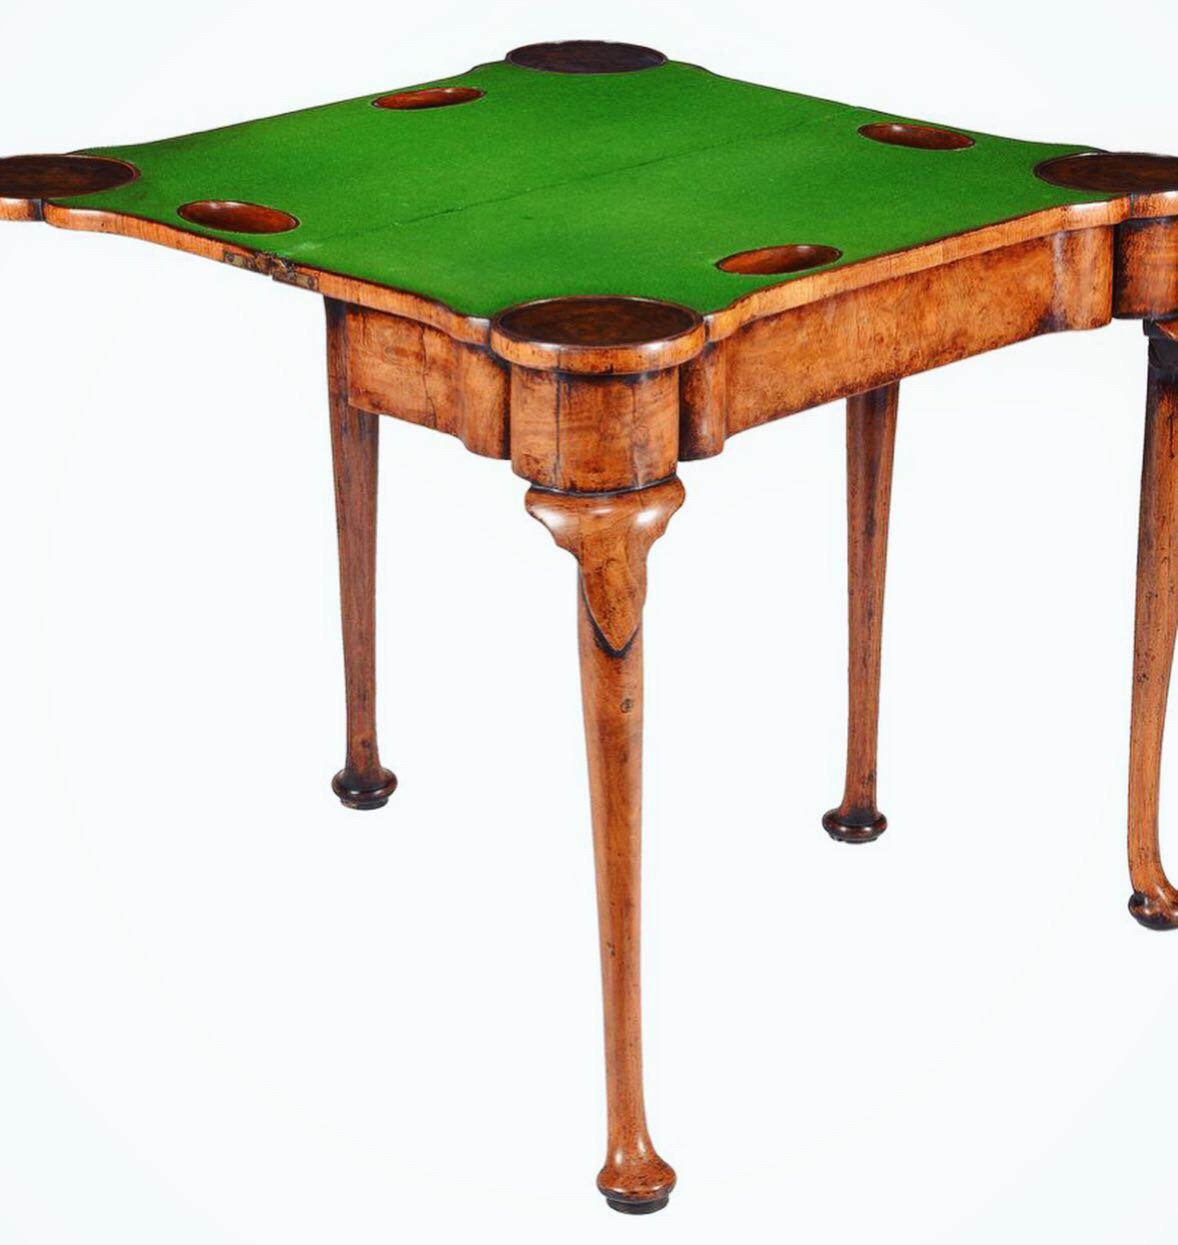 A fine and rare Queen Anne burr and highly figured walnut card table, circa 1710 England. 

The feather and cross banded book-matched top opens on original hinges to reveal a baize lined interior with figured walnut candle stands and counter